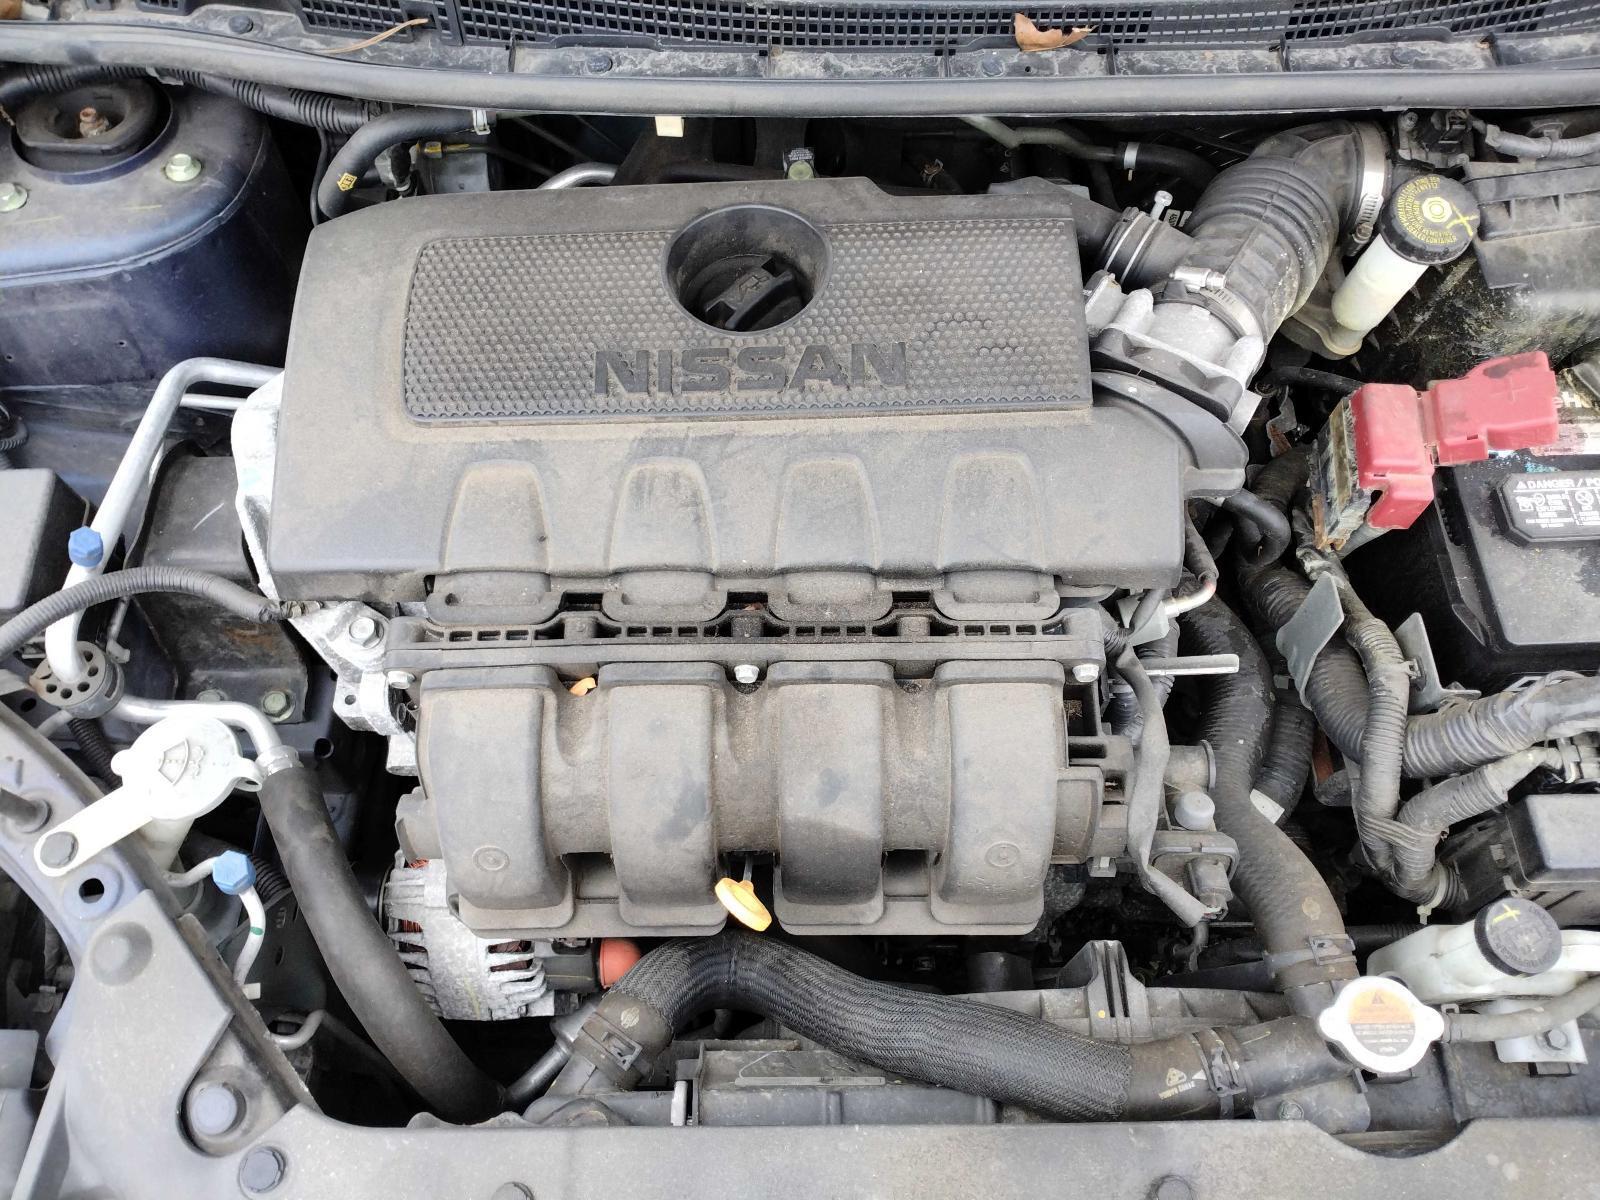 Used Engine Assembly fits: 2018 Nissan Sentra 1.8L VIN A 4th digit MR18